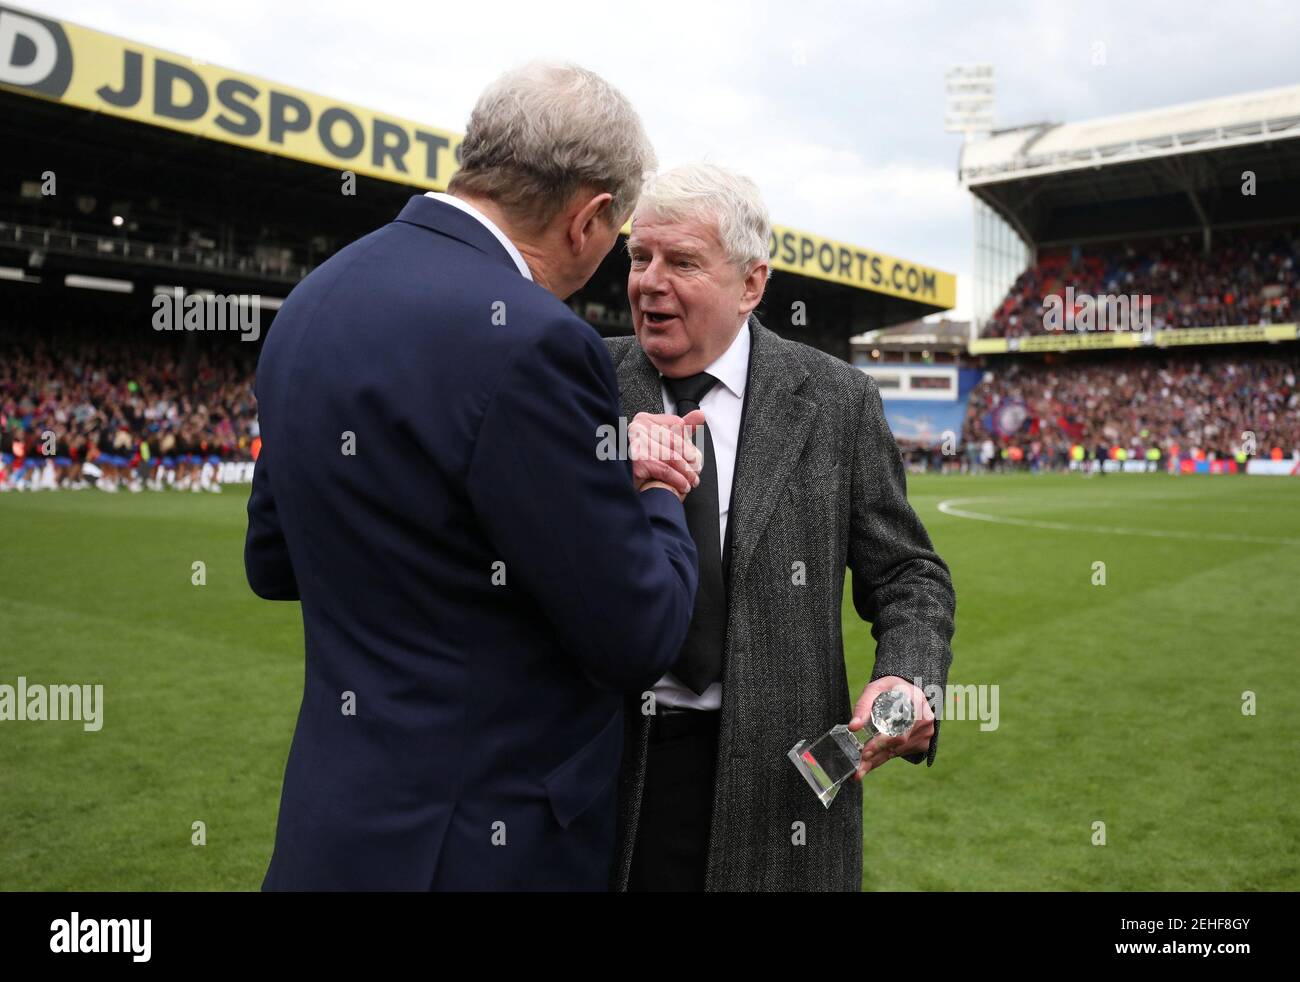 Soccer Football - Premier League - Crystal Palace vs West Bromwich Albion - Selhurst Park, London, Britain - May 13, 2018   Crystal Palace manager Roy Hodgson presents an award to commentator John Motson after the match   REUTERS/Hannah McKay    EDITORIAL USE ONLY. No use with unauthorized audio, video, data, fixture lists, club/league logos or "live" services. Online in-match use limited to 75 images, no video emulation. No use in betting, games or single club/league/player publications.  Please contact your account representative for further details. Stock Photo